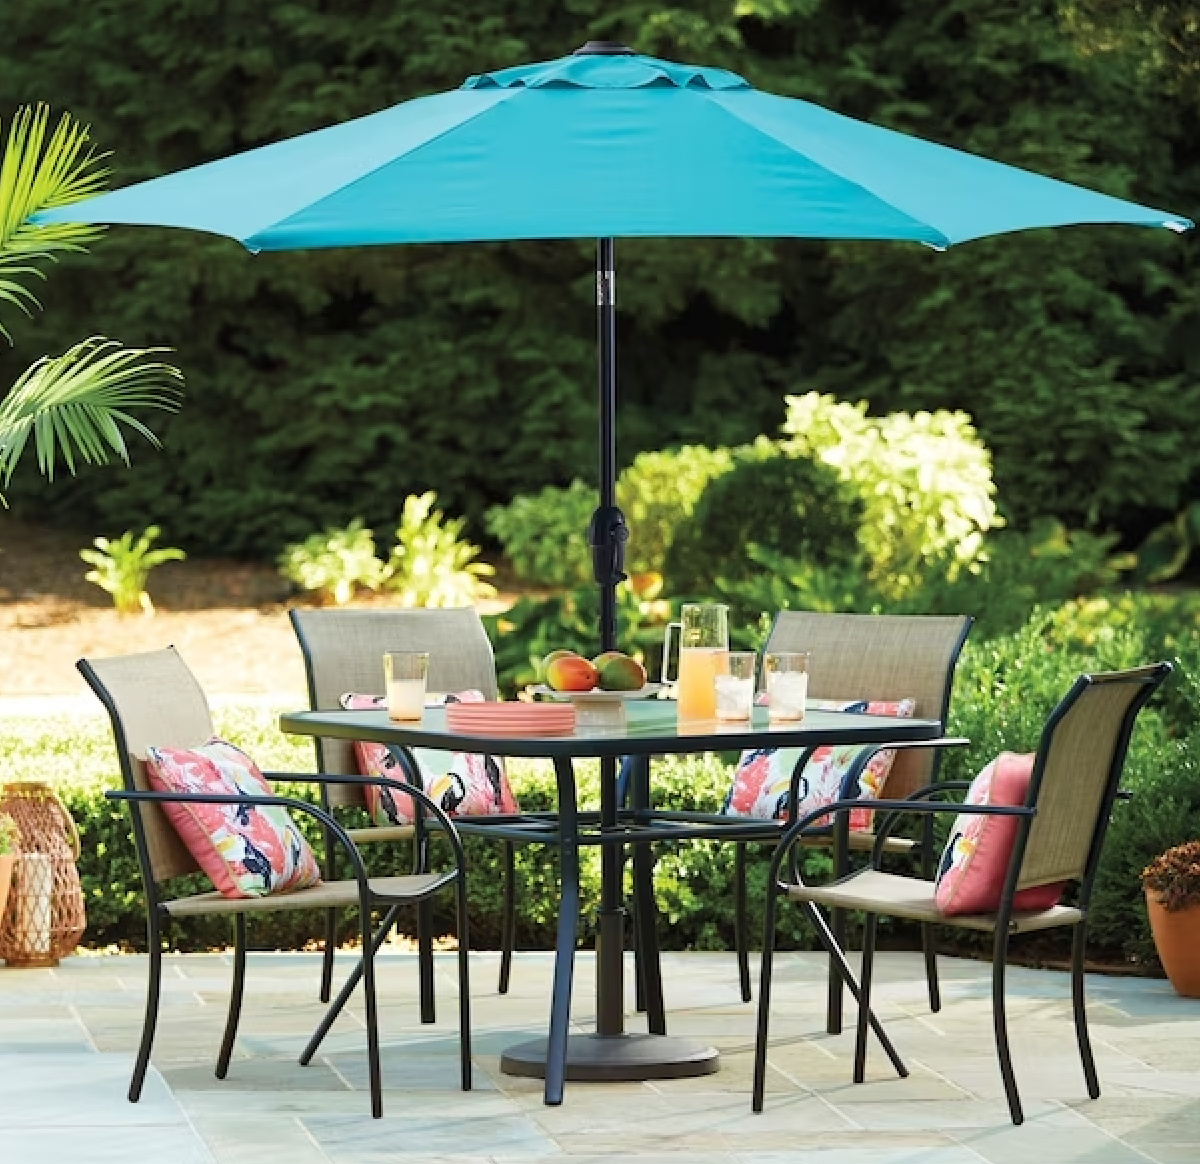 Lowes Patio umbrella over an outdoor dining table